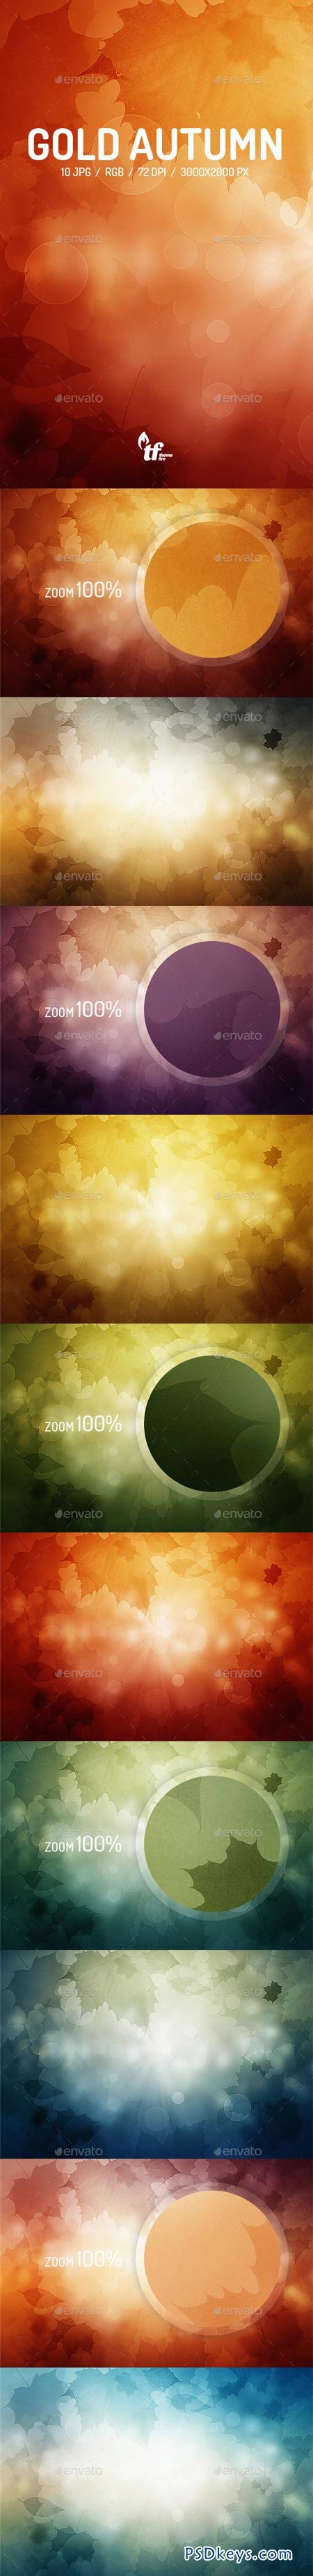 Gold Autumn Backgrounds 9091523